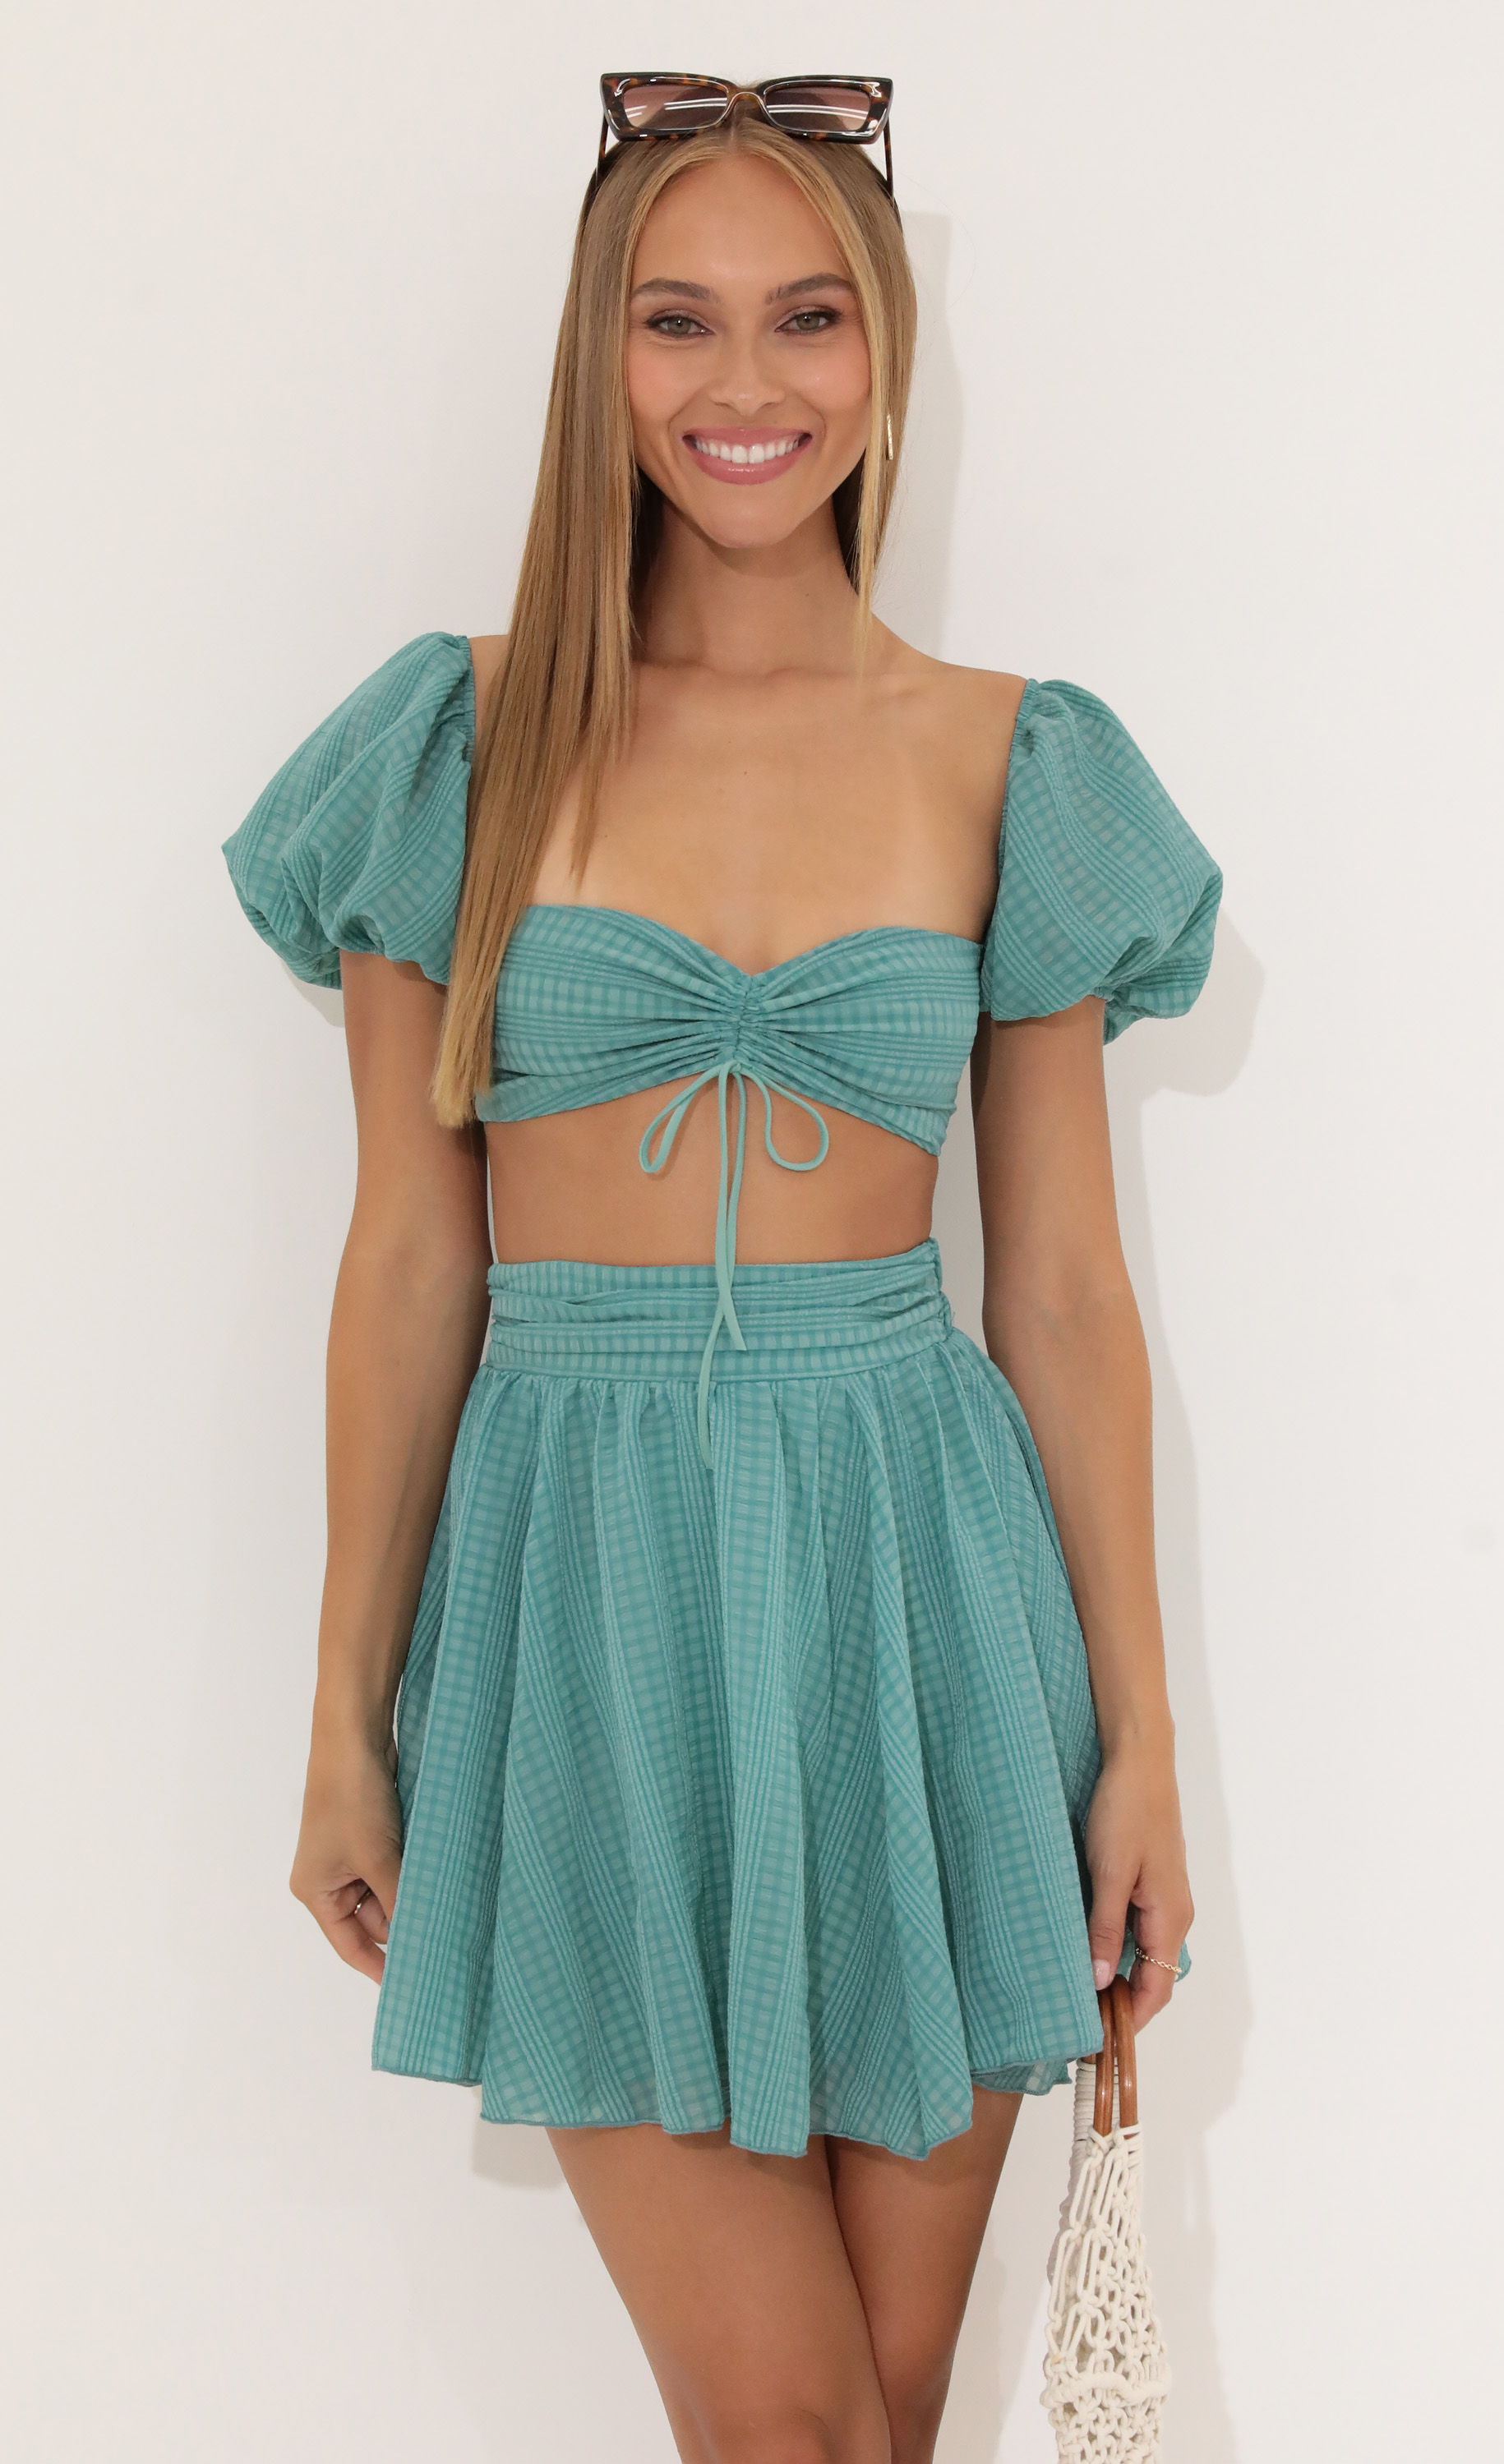 Plaid Chiffon Baby Doll Two Piece Skirt Set in Green